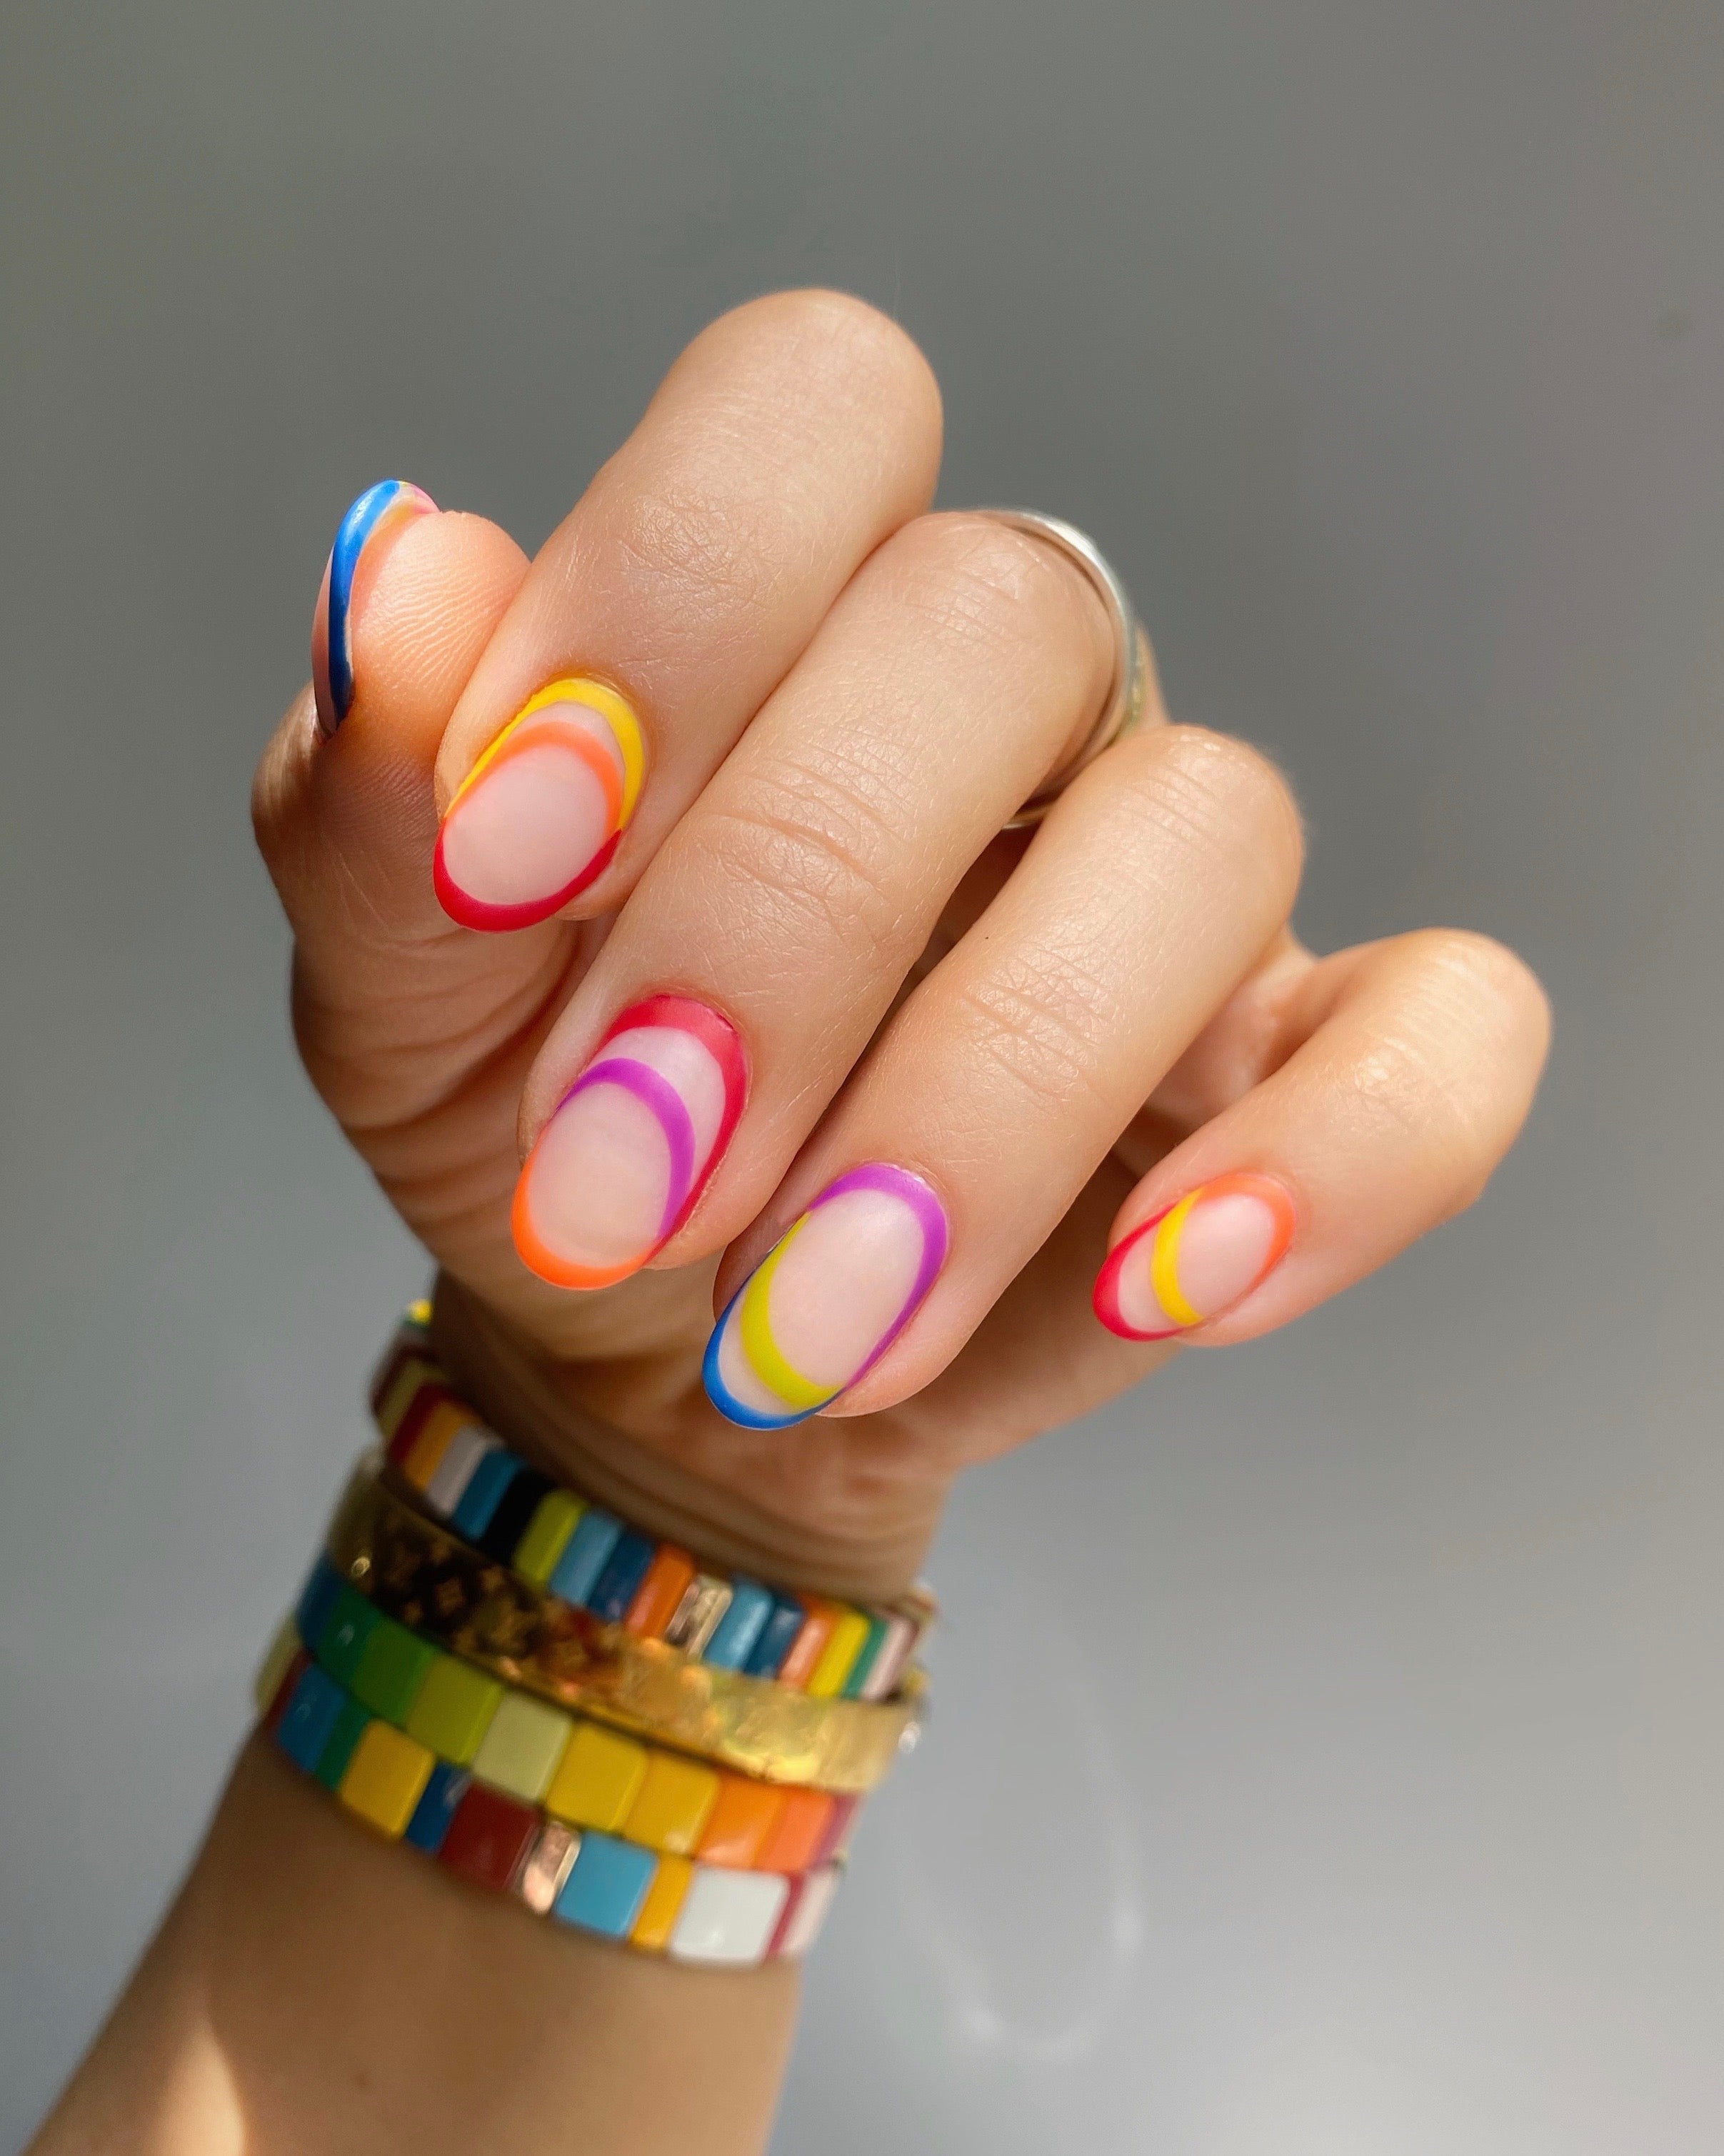 Can You Copyright Nail Art? Competition On Instagram